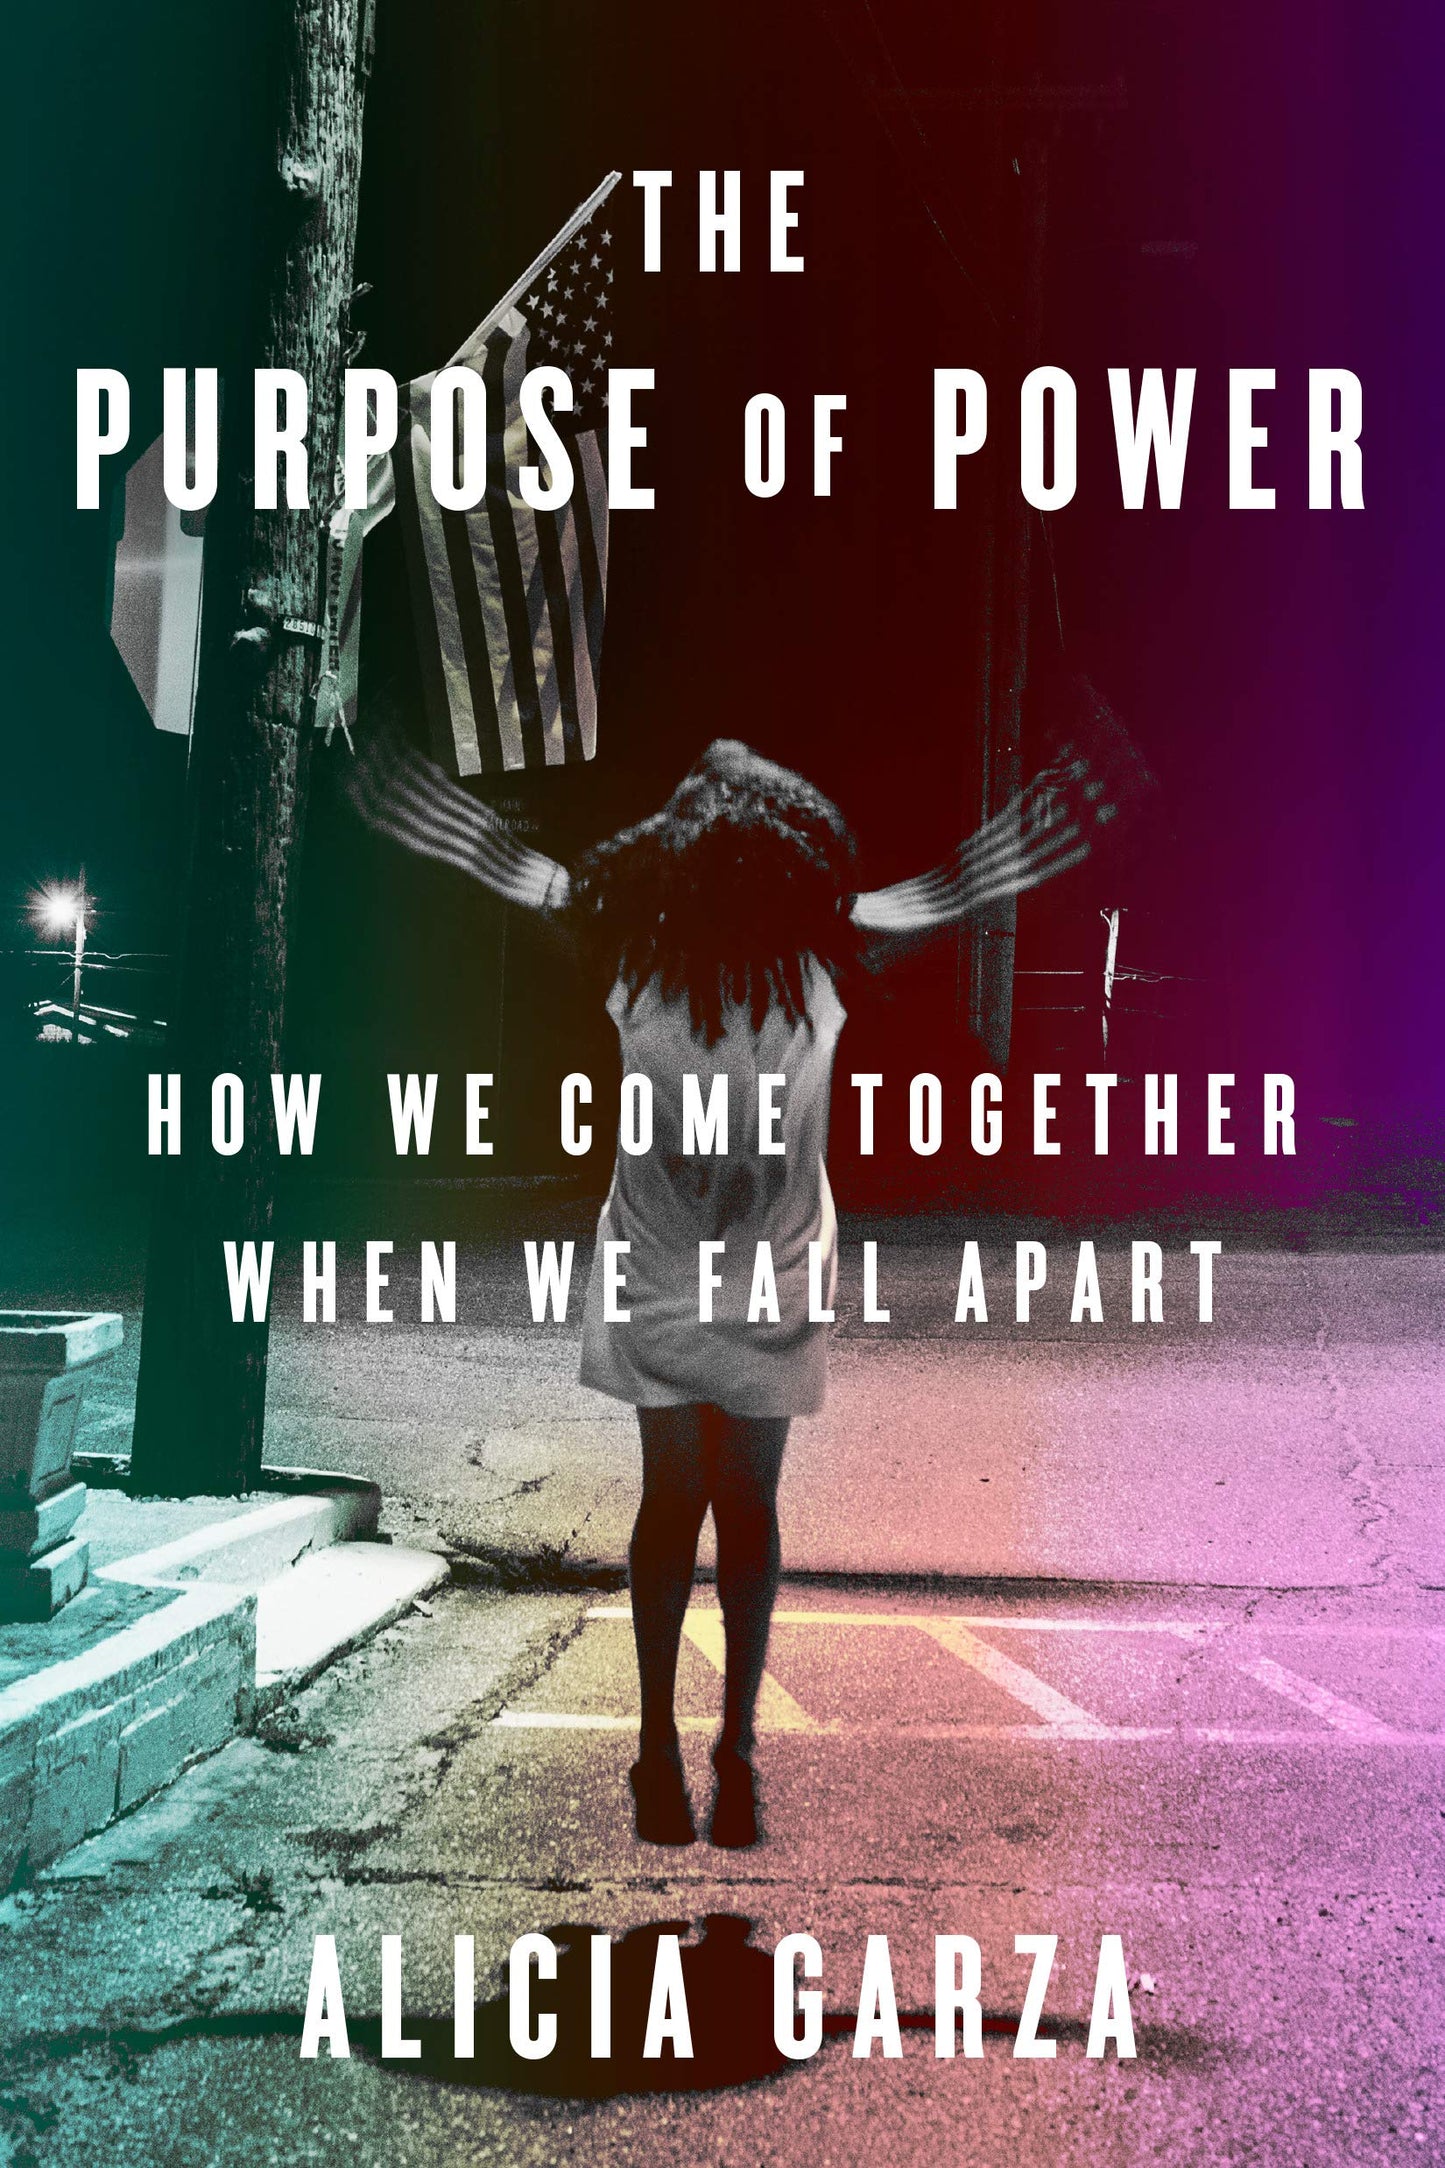 The Purpose of Power // How We Come Together When We Fall Apart